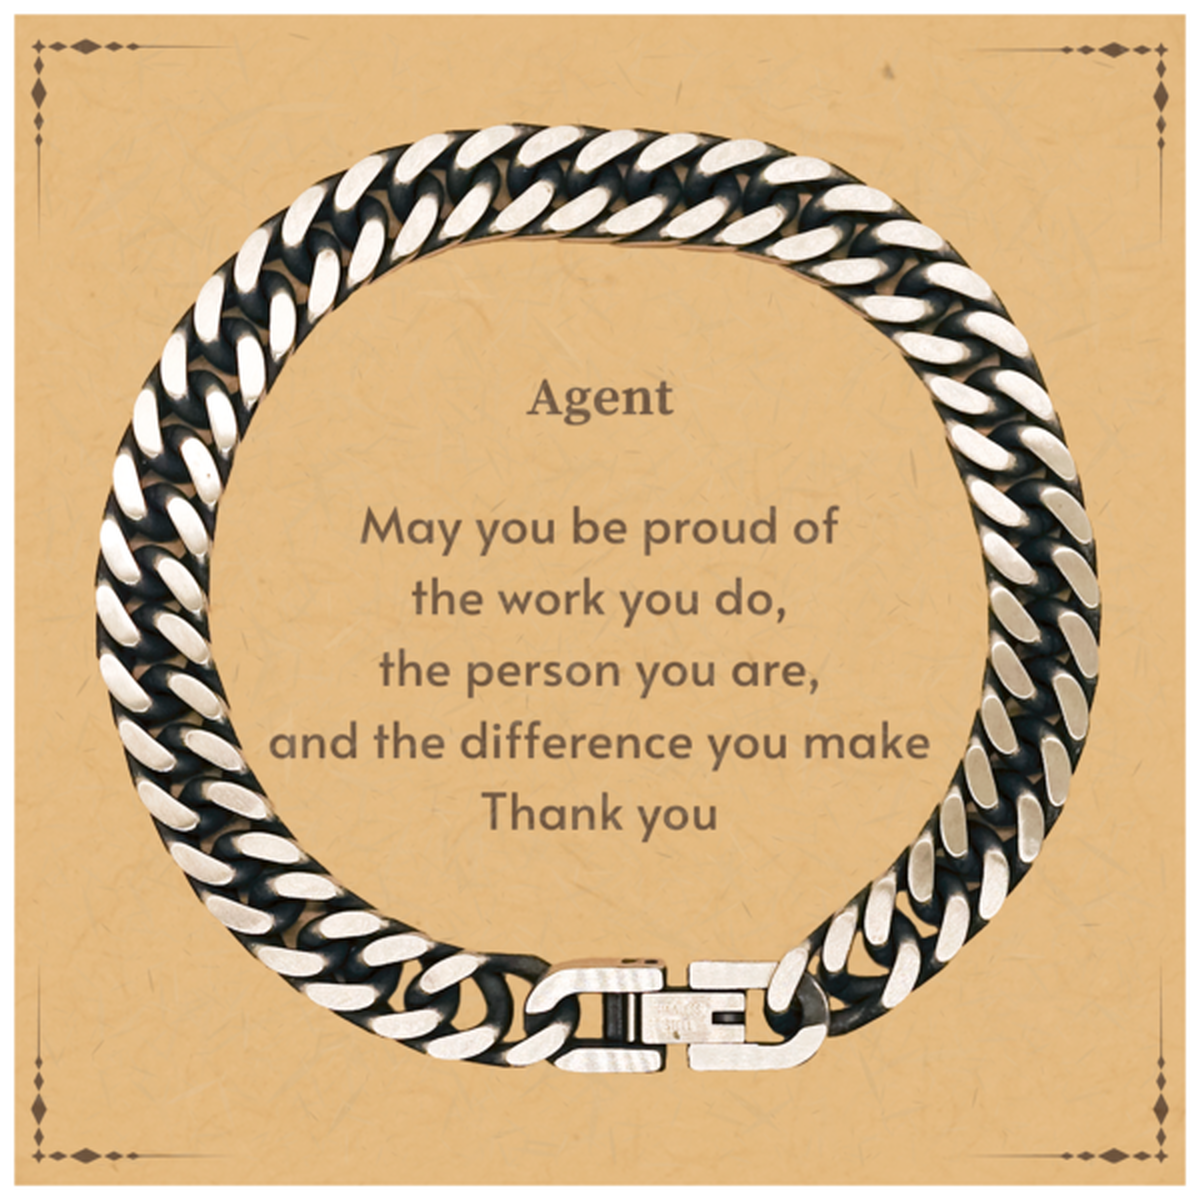 Heartwarming Cuban Link Chain Bracelet Retirement Coworkers Gifts for Agent, Agent May You be proud of the work you do, the person you are Gifts for Boss Men Women Friends